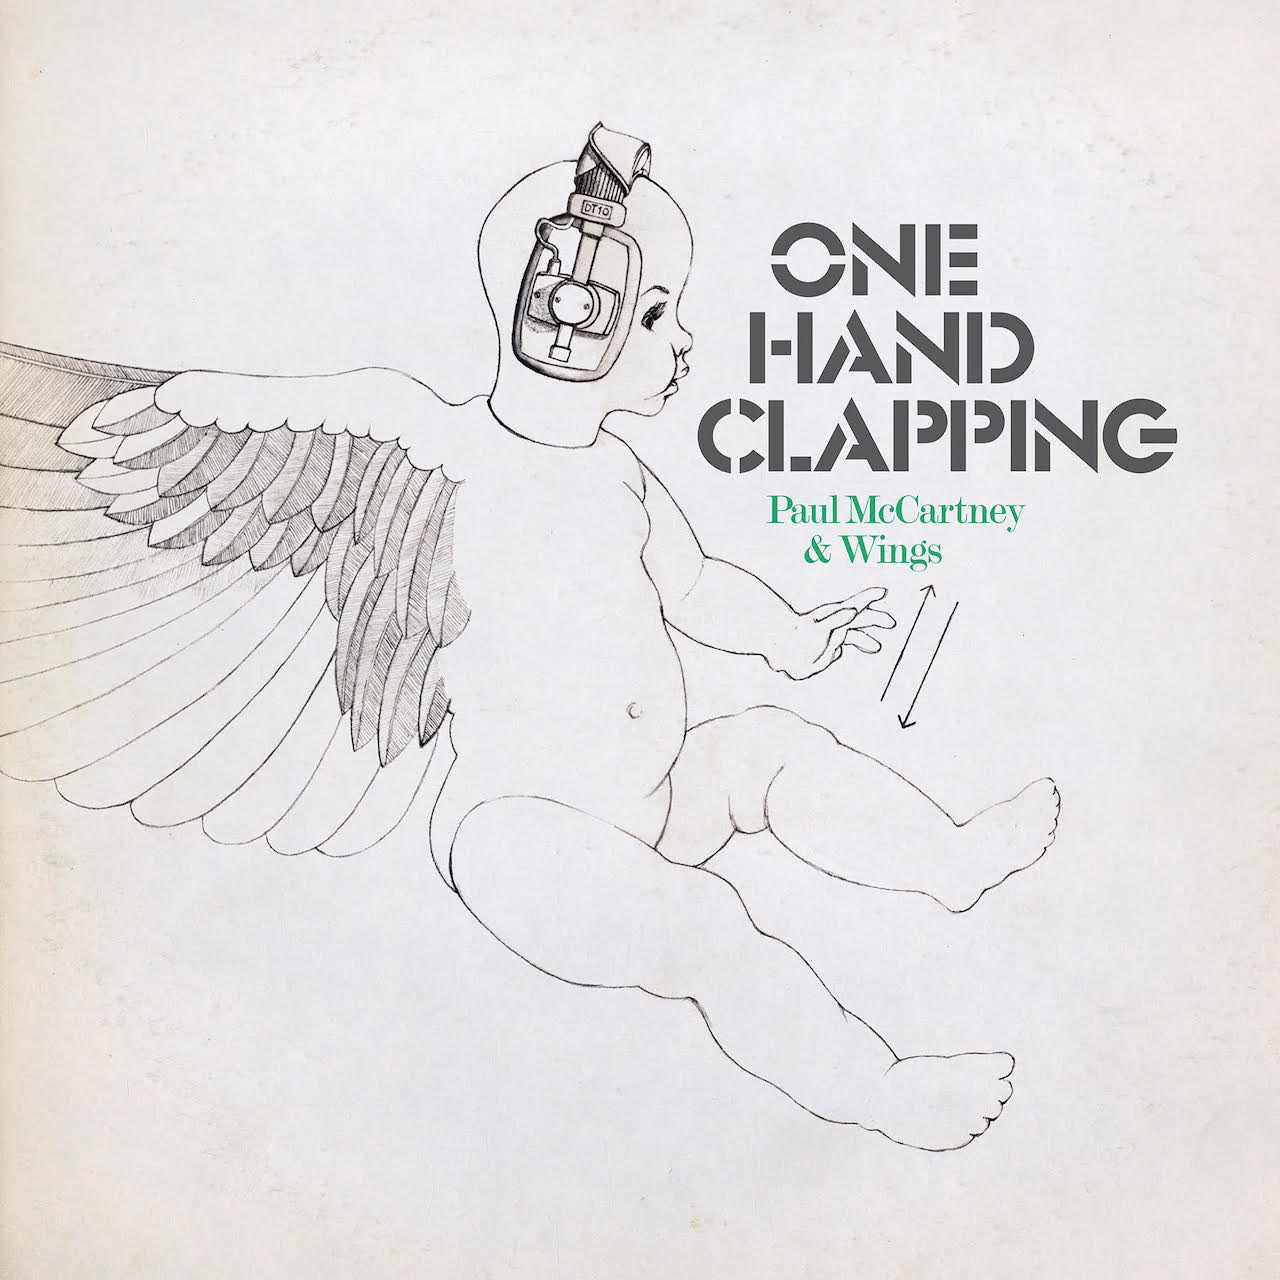 Paul McCartney And Wings To Release Historic Live Album ‘One Hand Clapping’